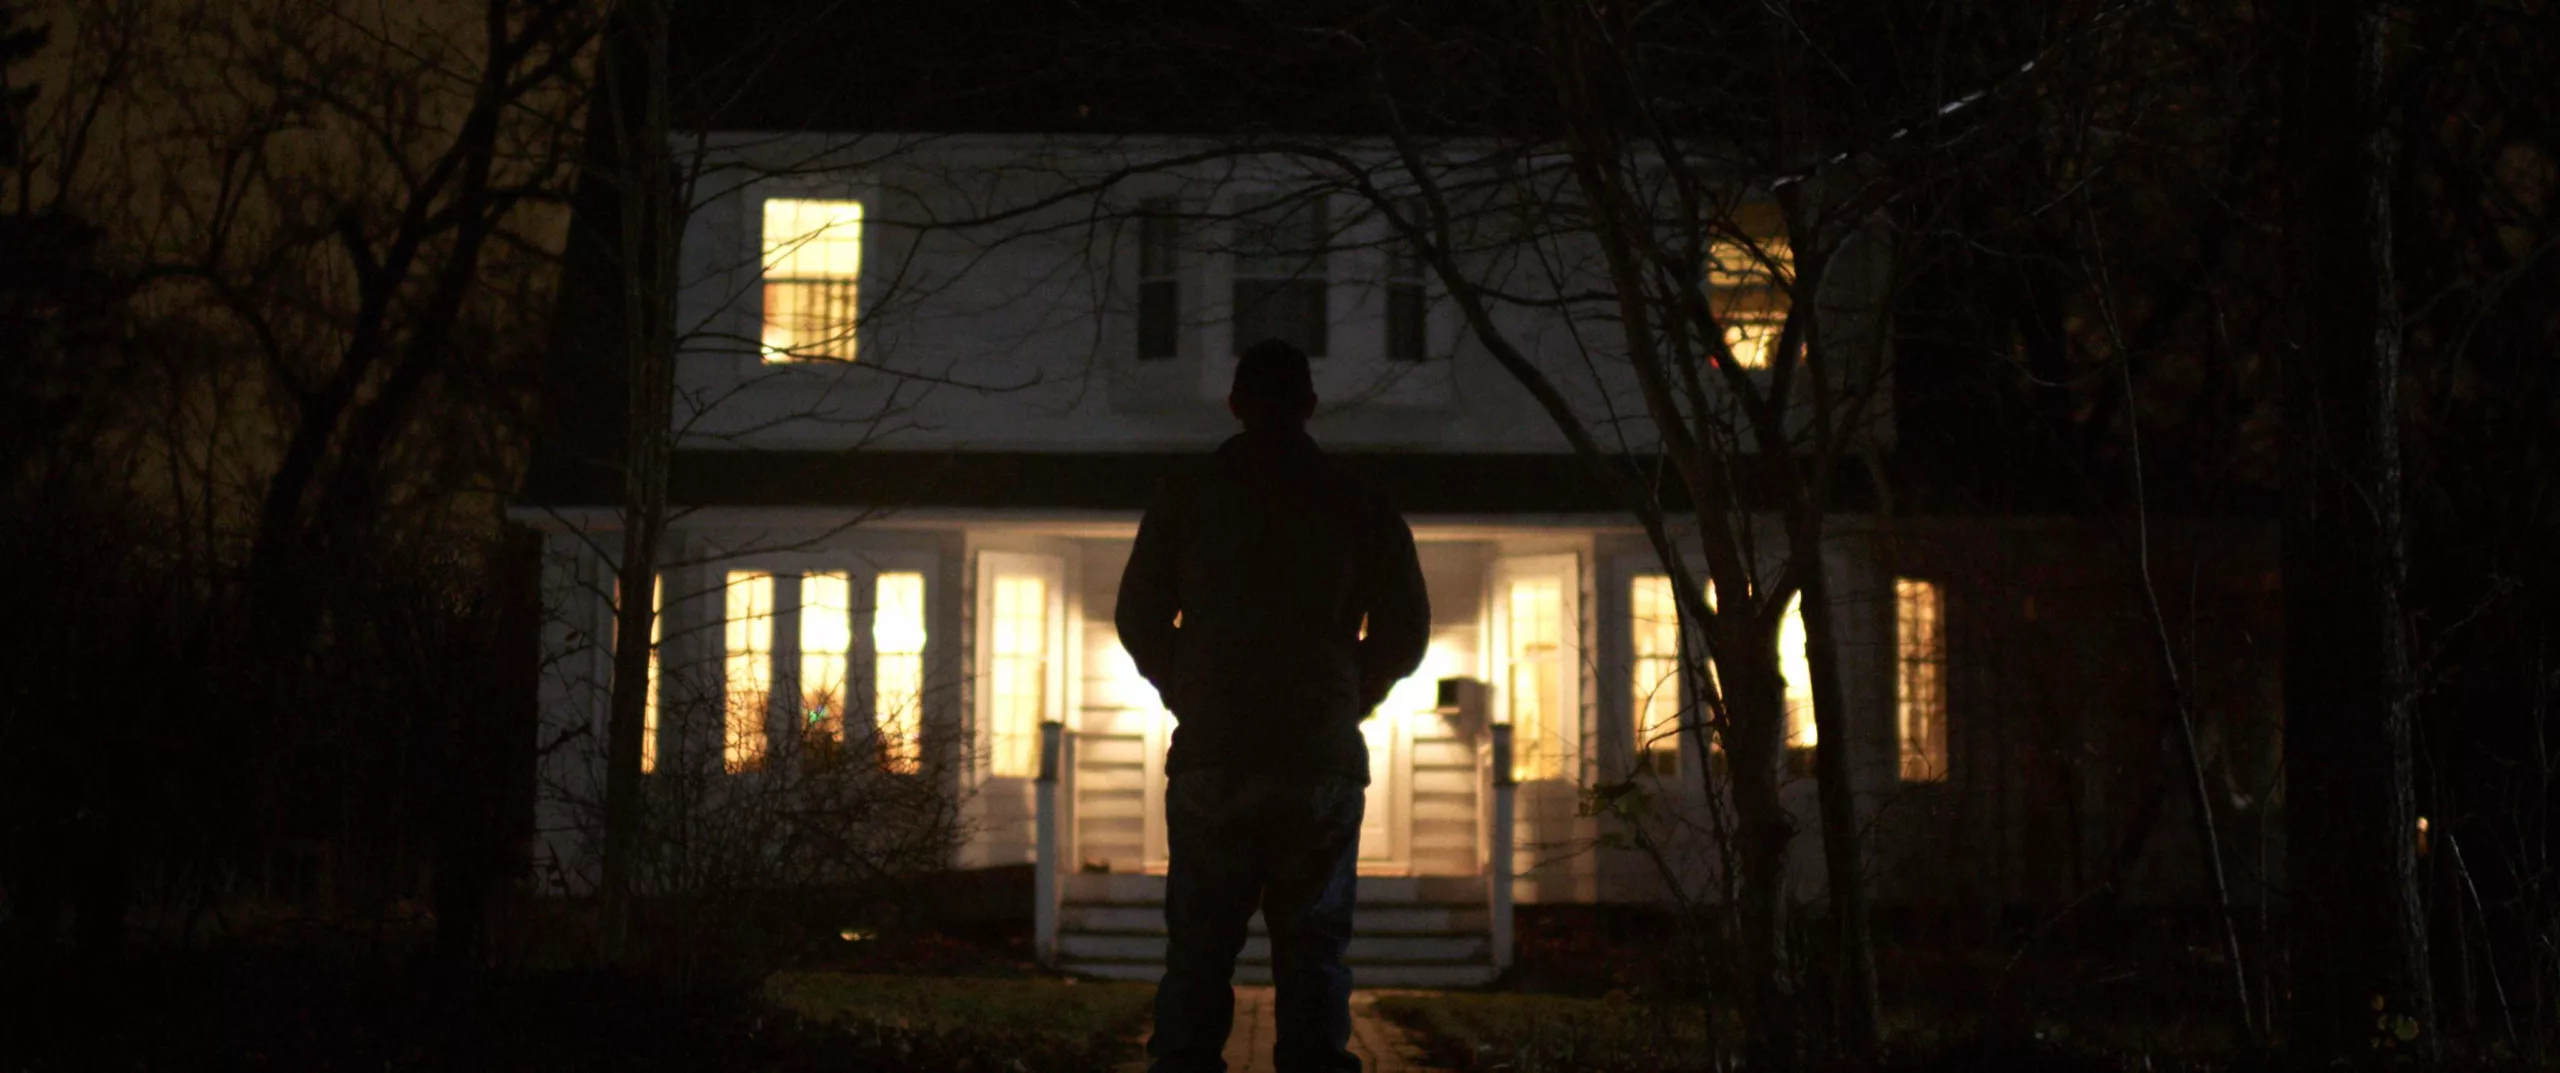 A scary figure with their back turned to us is silhouetted by lights inside a house in the background at night.